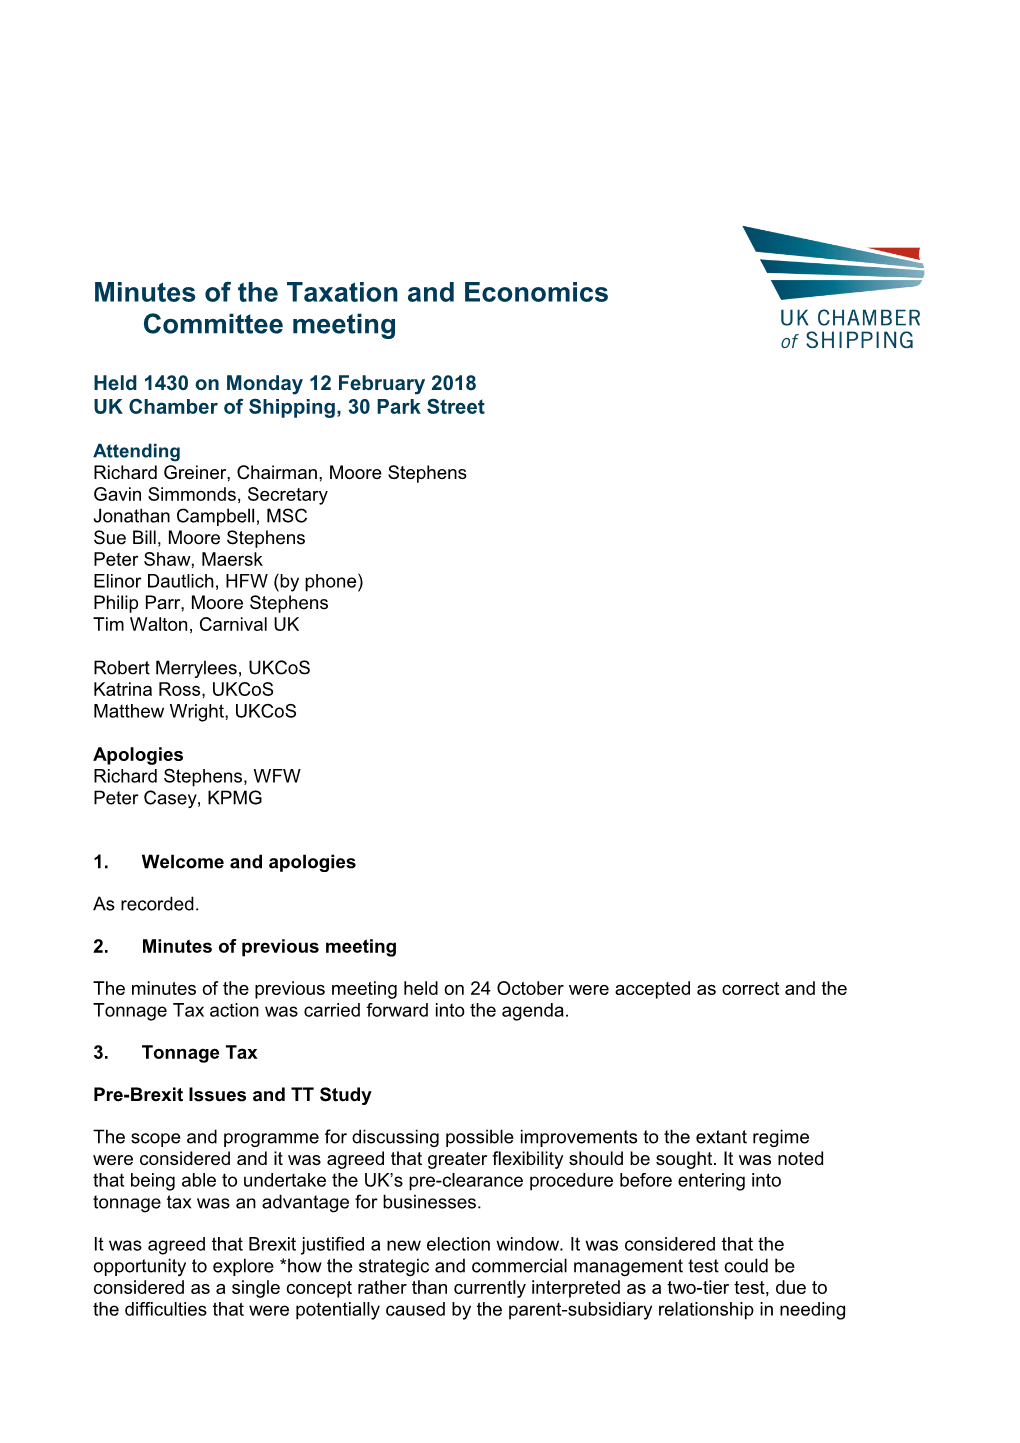 Minutes of the Taxation and Economics Committee Meeting